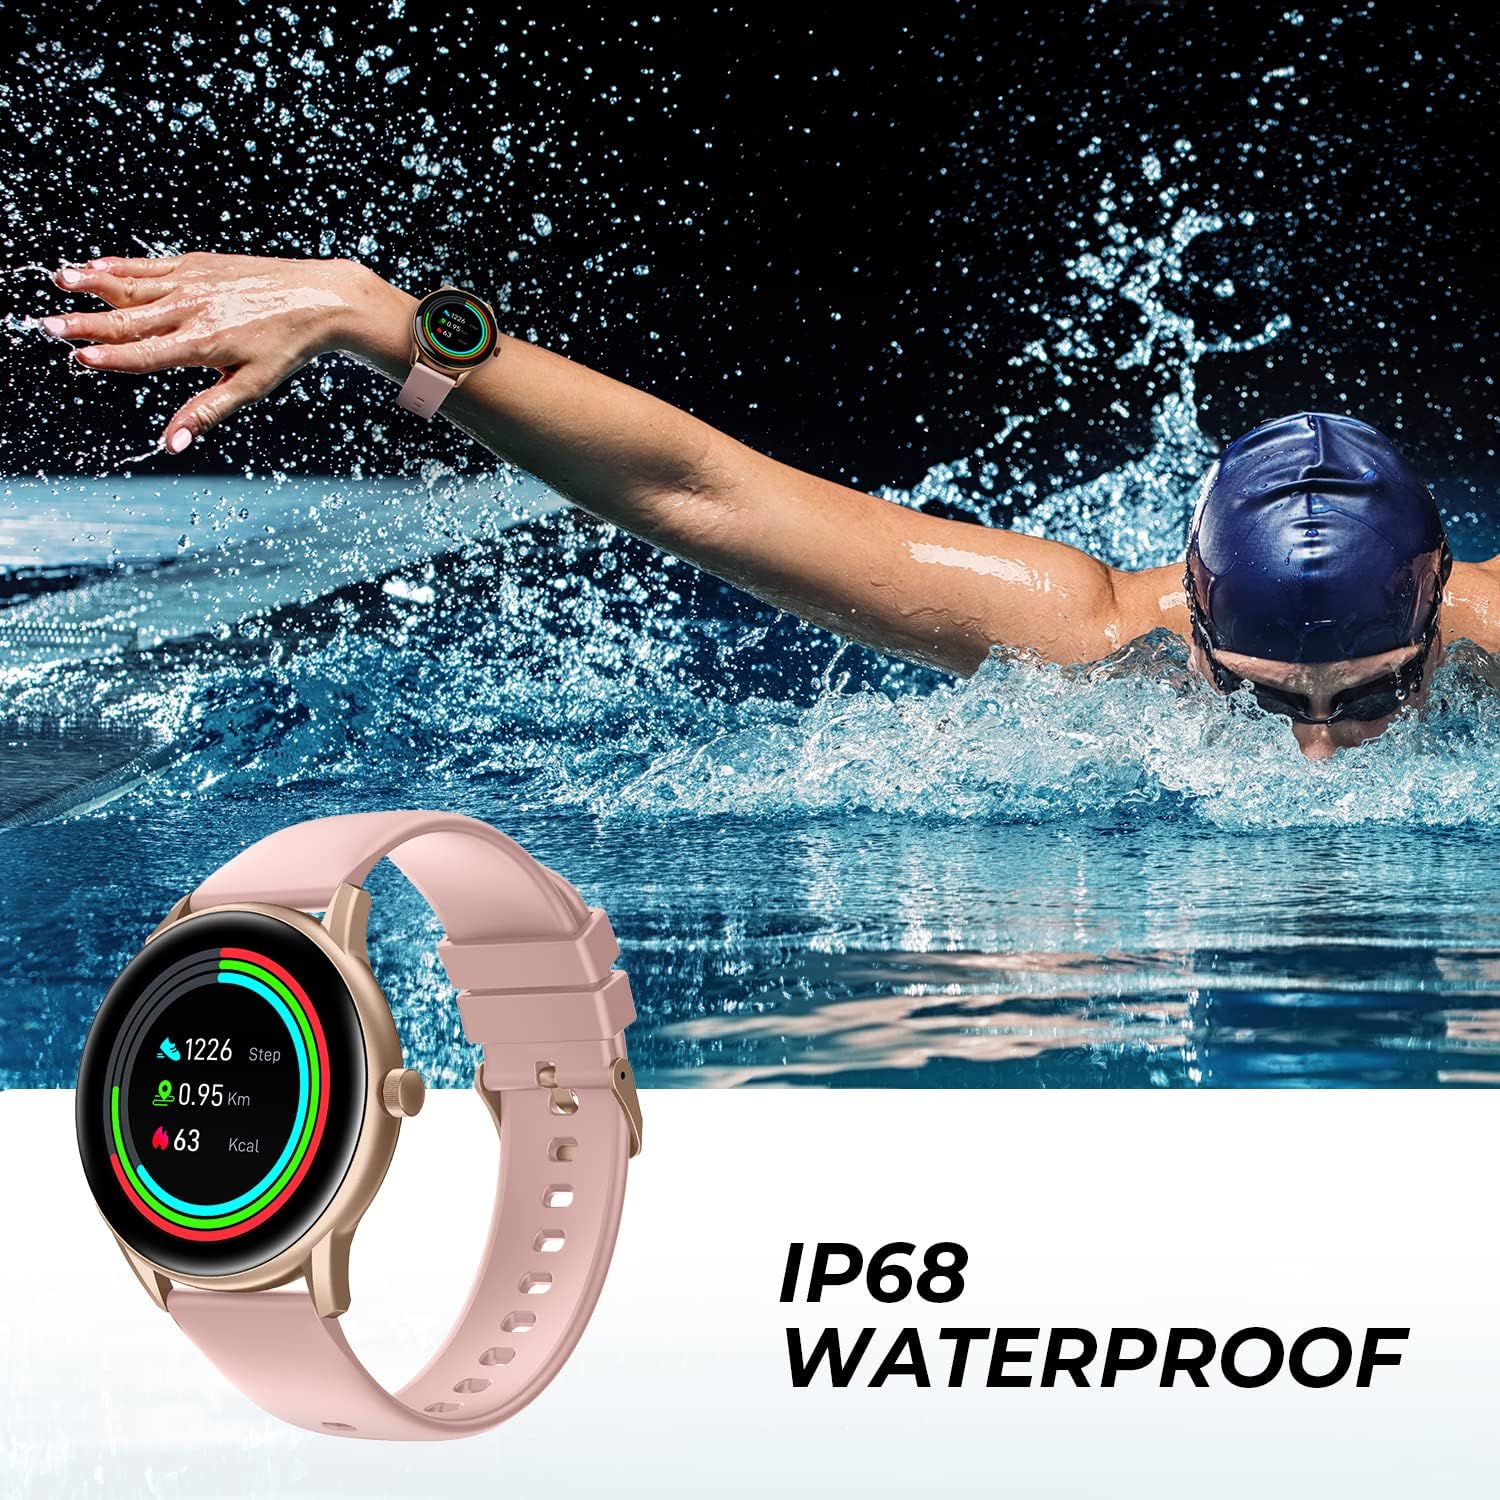 Smart Watch SoundPEATS Watch Pro 1 SpO2, Smartwatch for Men Women, Fitness Tracker 13 Sports Modes Heart Rate Sleep Tracker & Customizable Dials, Compatible with iPhone Android Phones IP68 Waterproof